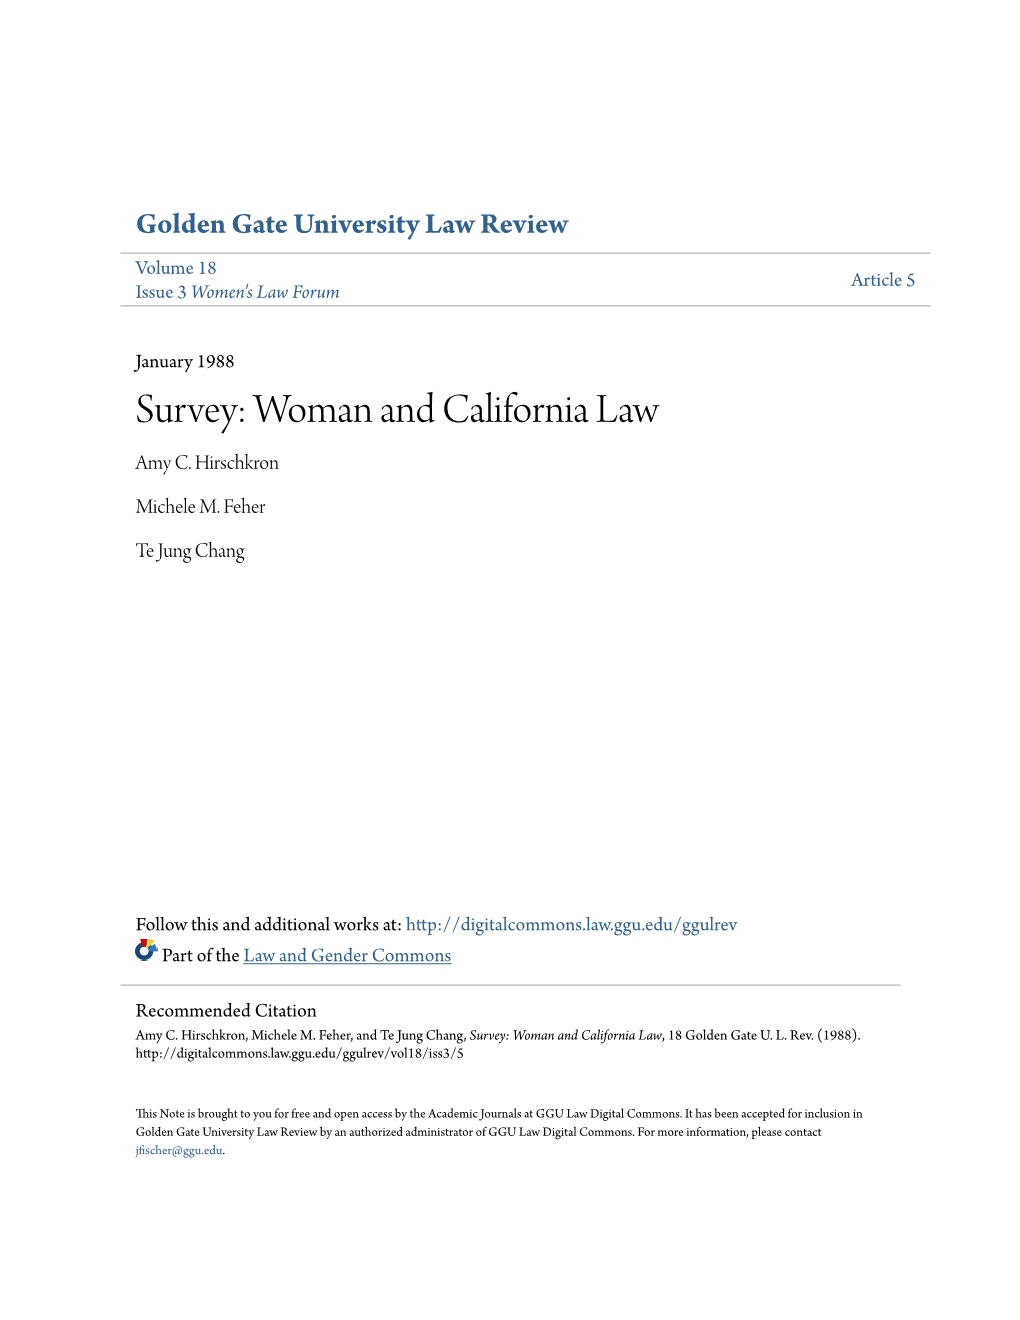 Woman and California Law Amy C